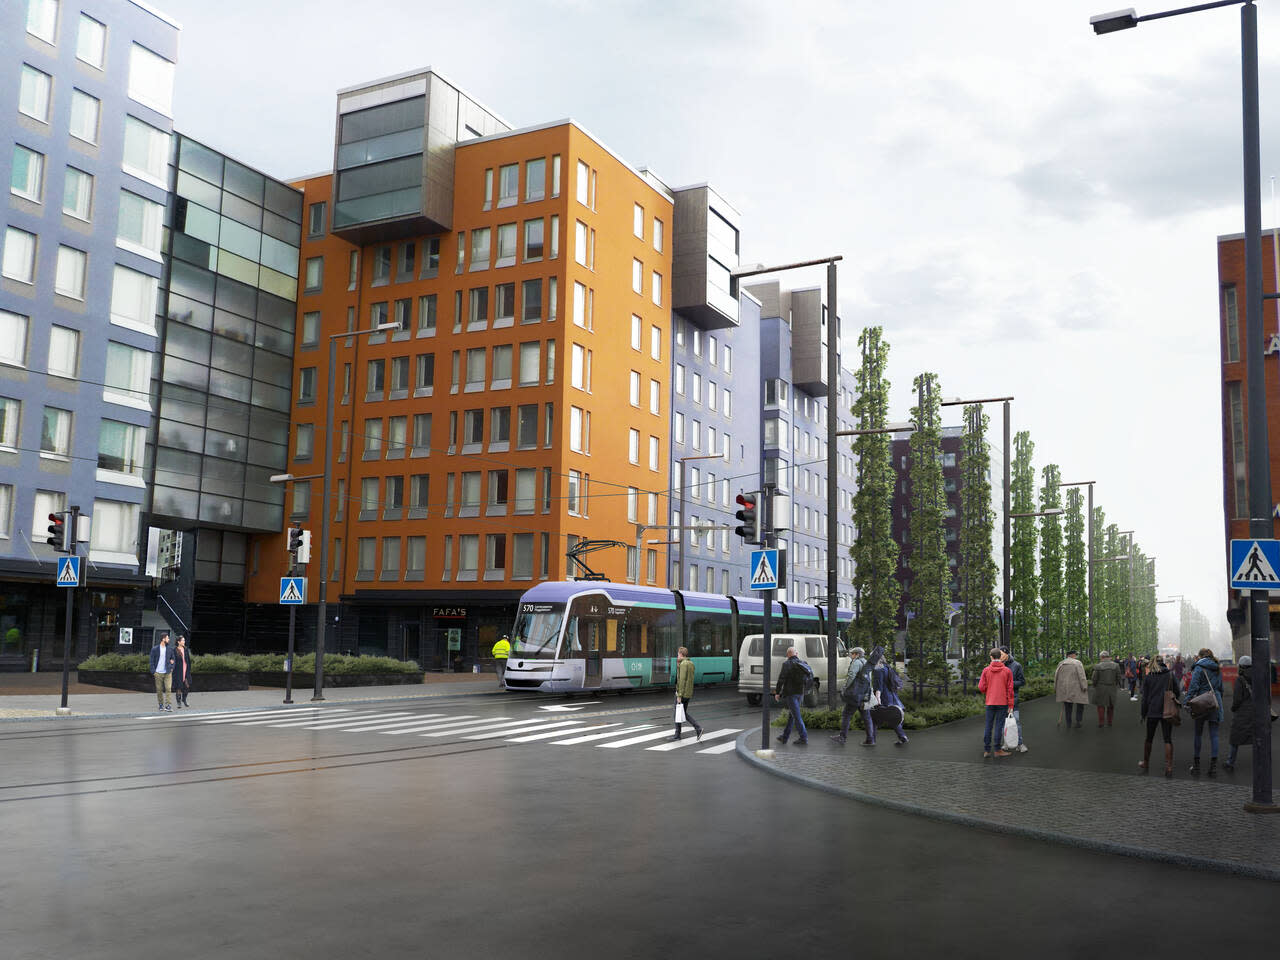 Vantaa approves the tram project